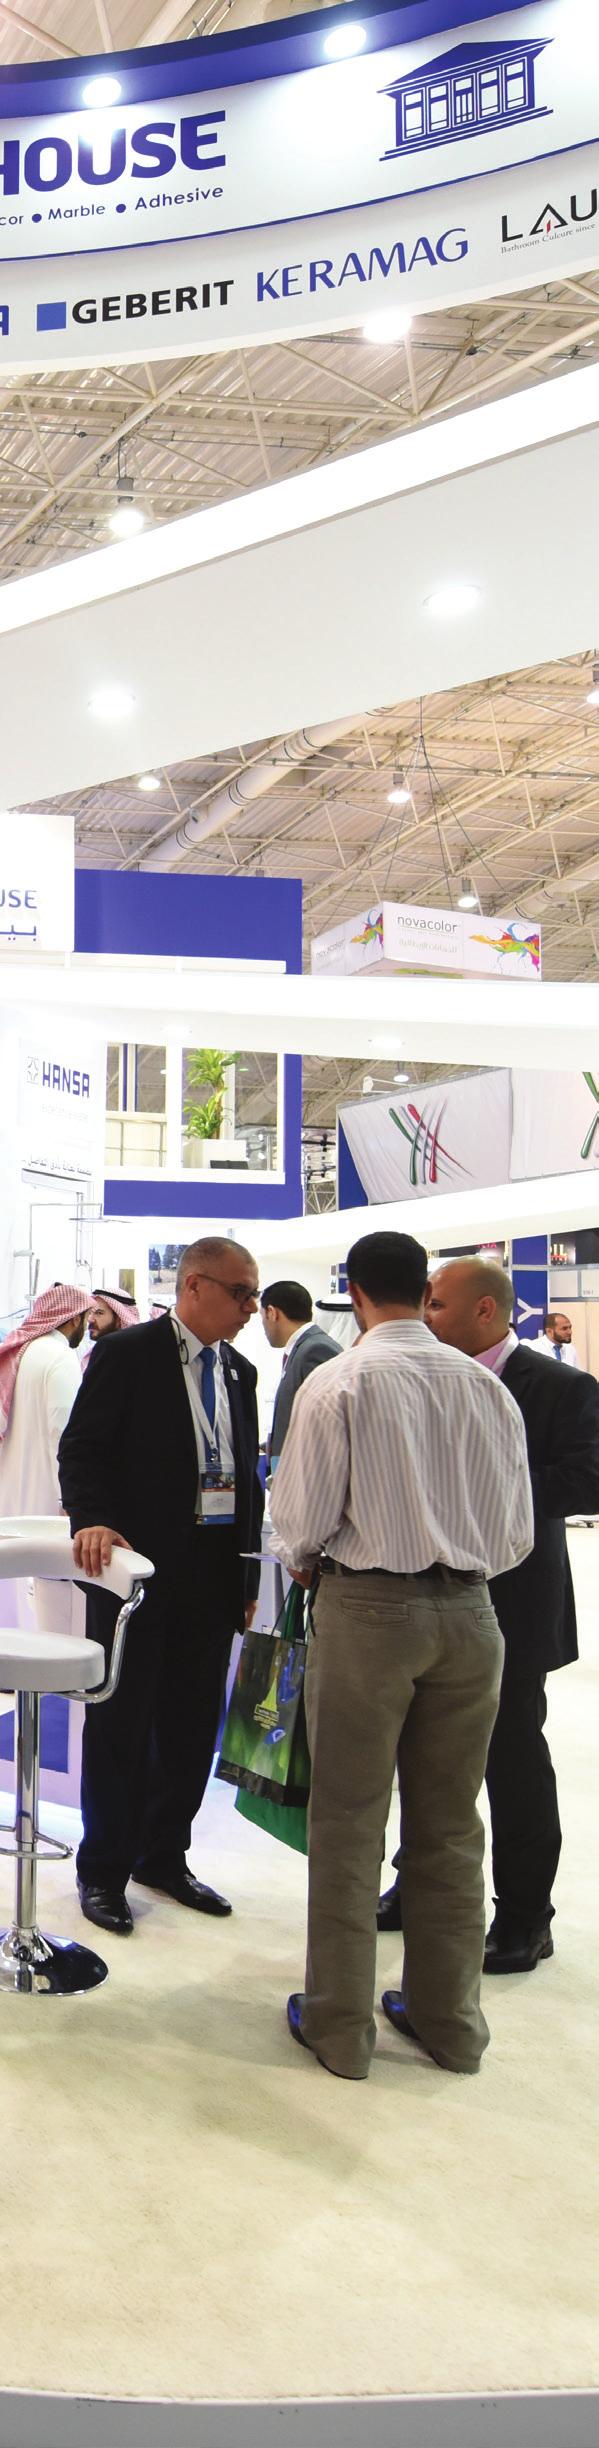 Saudi Arabia s construction market is on the rise In line with Saudi Arabia s Vision 2030 for development, the construction industry is set to witness rapid growth as the government is in the process